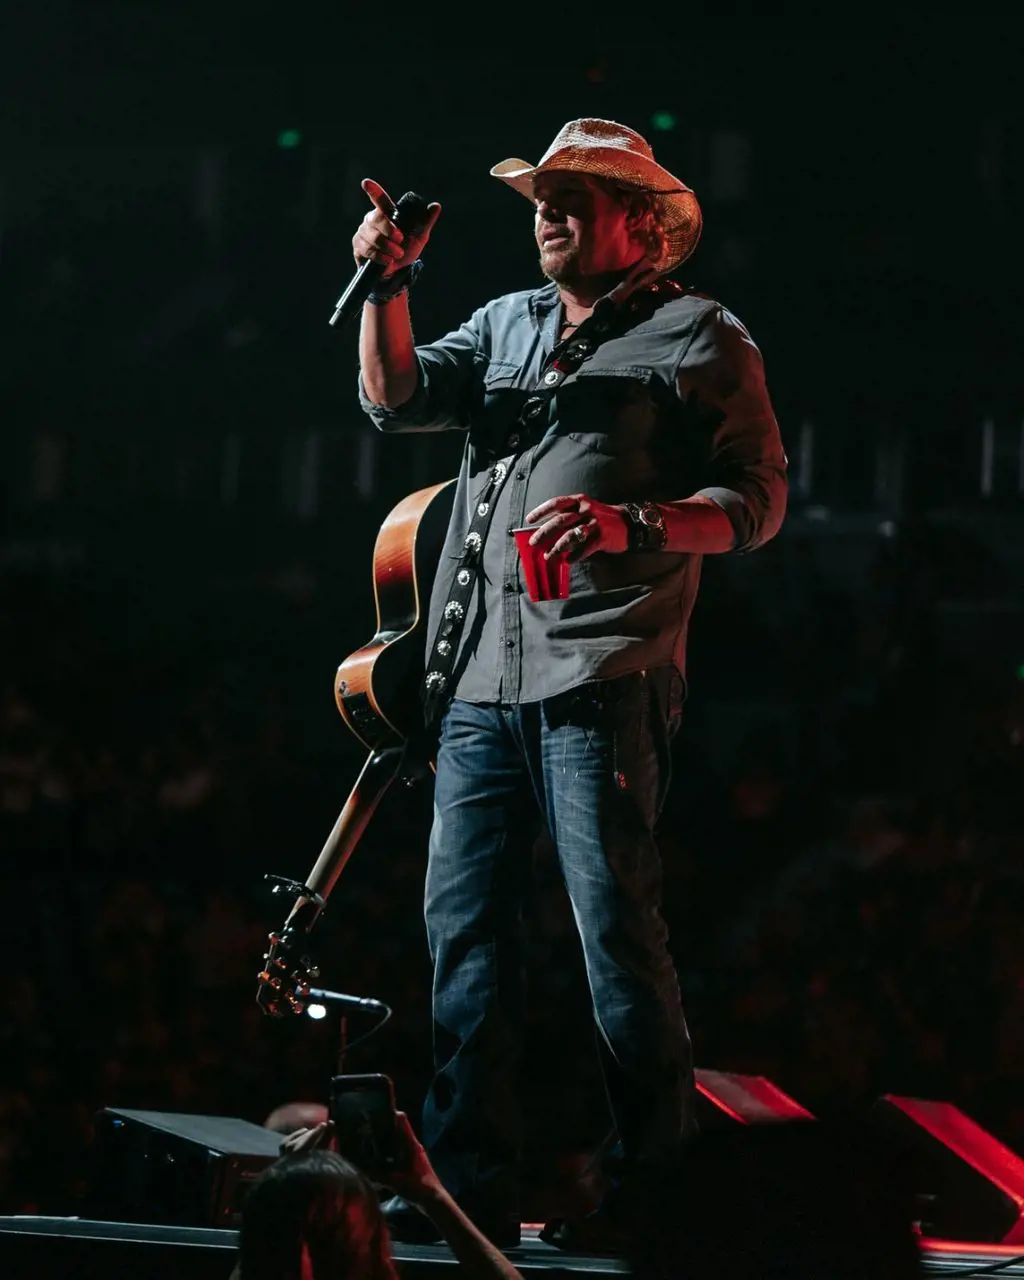 Toby Keith singing his sing 